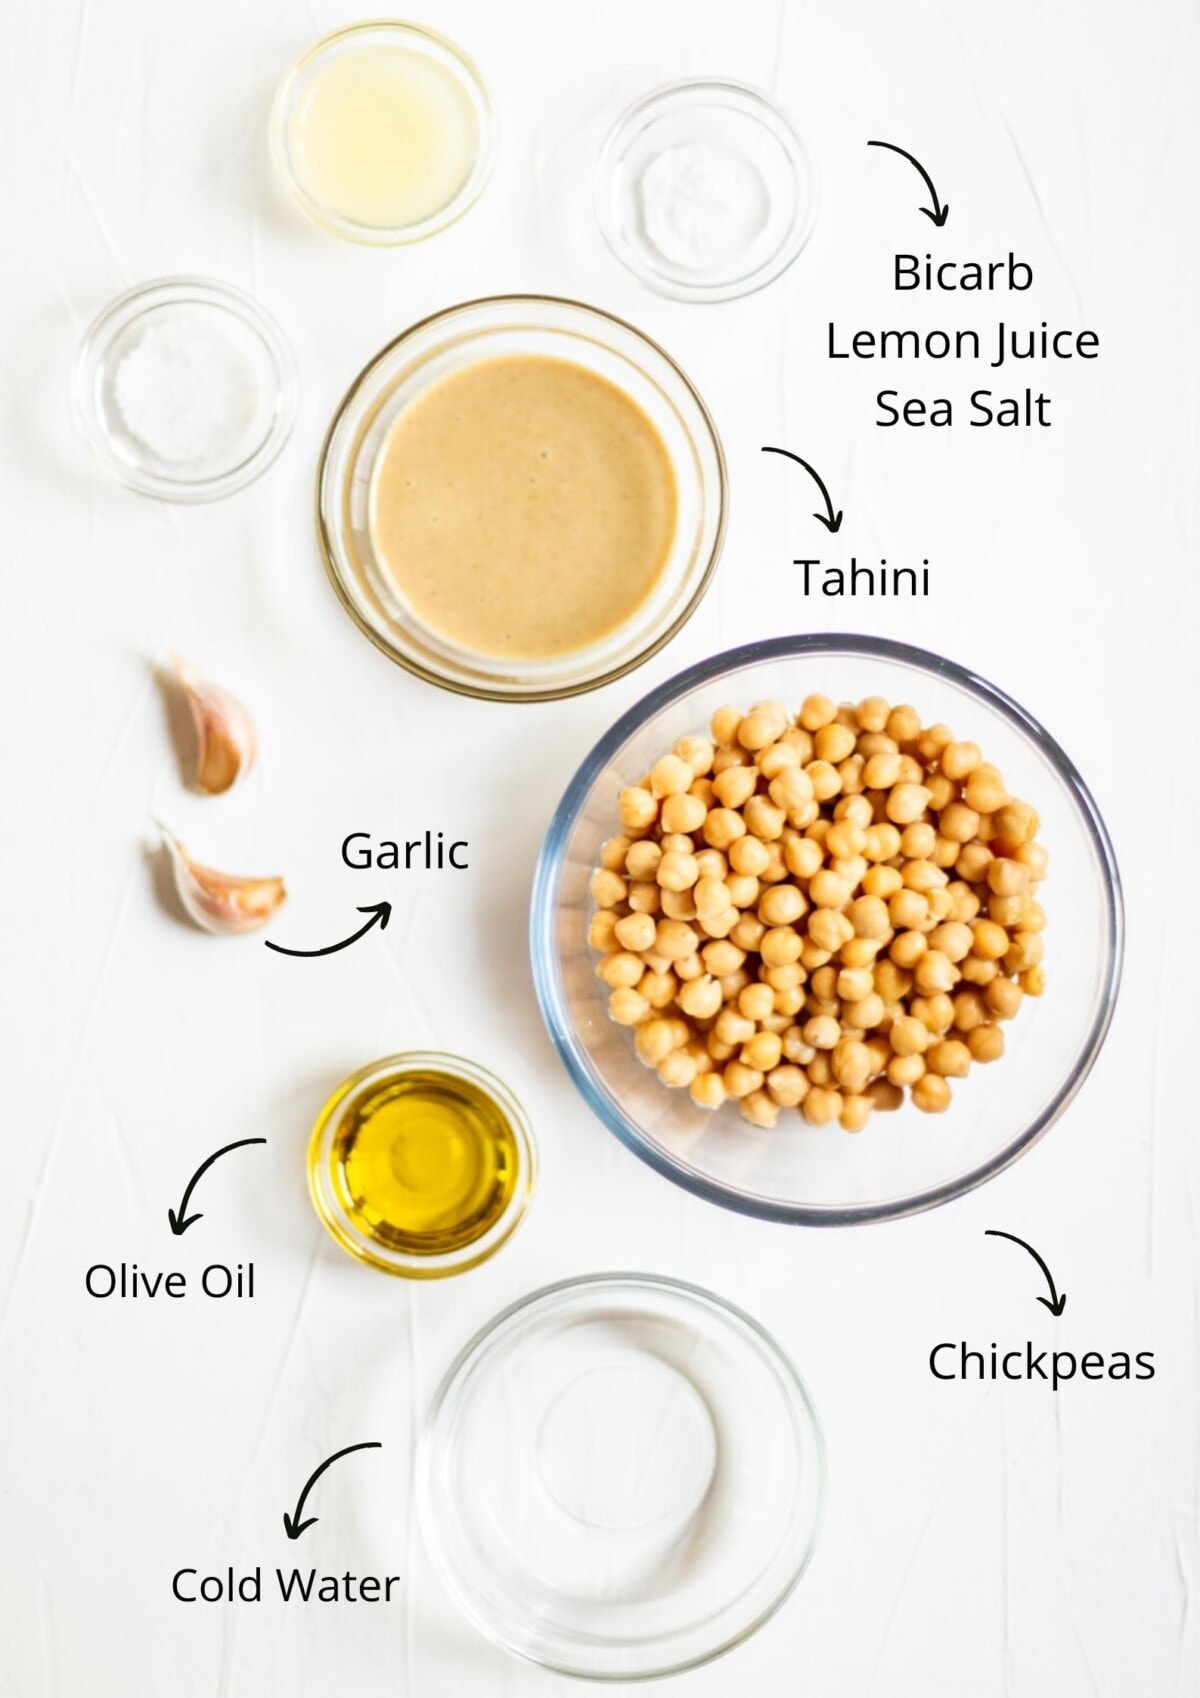 The hummus ingredients all laid out in glass bowls, on a white background and labelled.